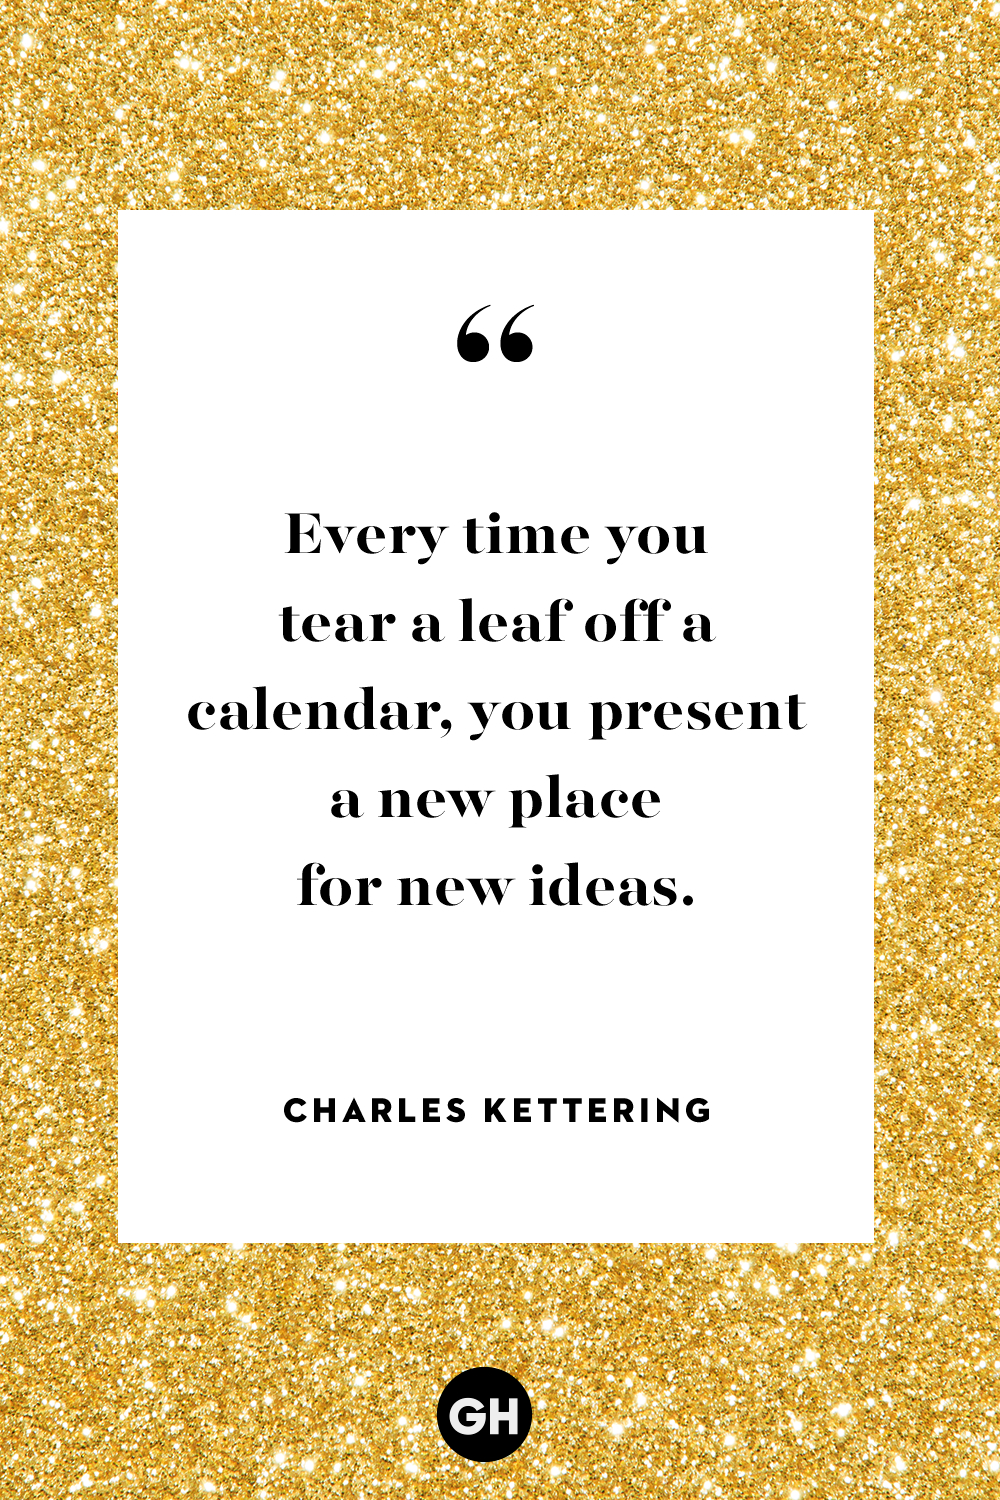 50 Best New Year Quotes 2020 - Inspiring Nye End Of Year Sayings